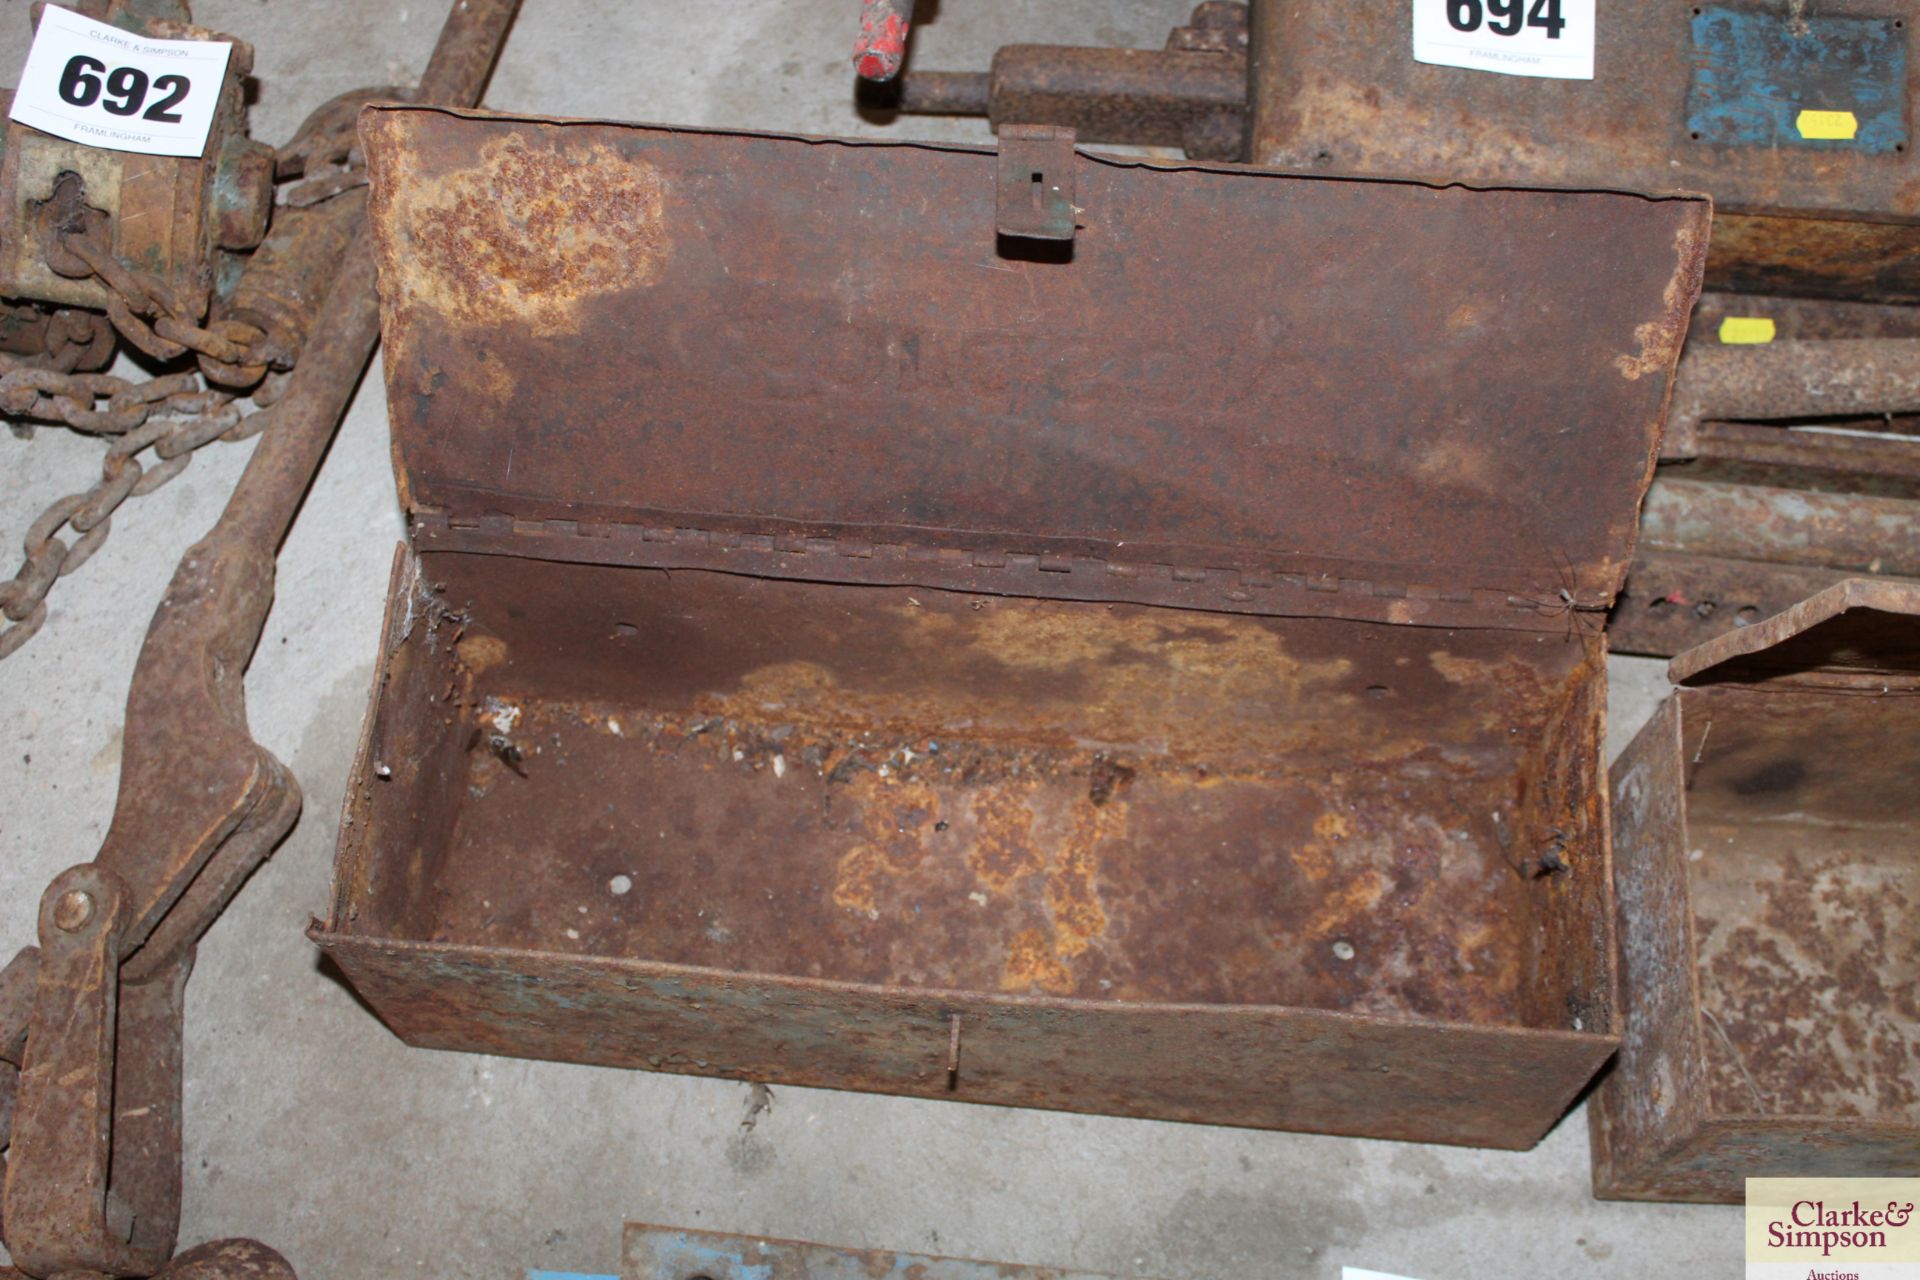 2x Fordson toolboxes. - Image 2 of 3